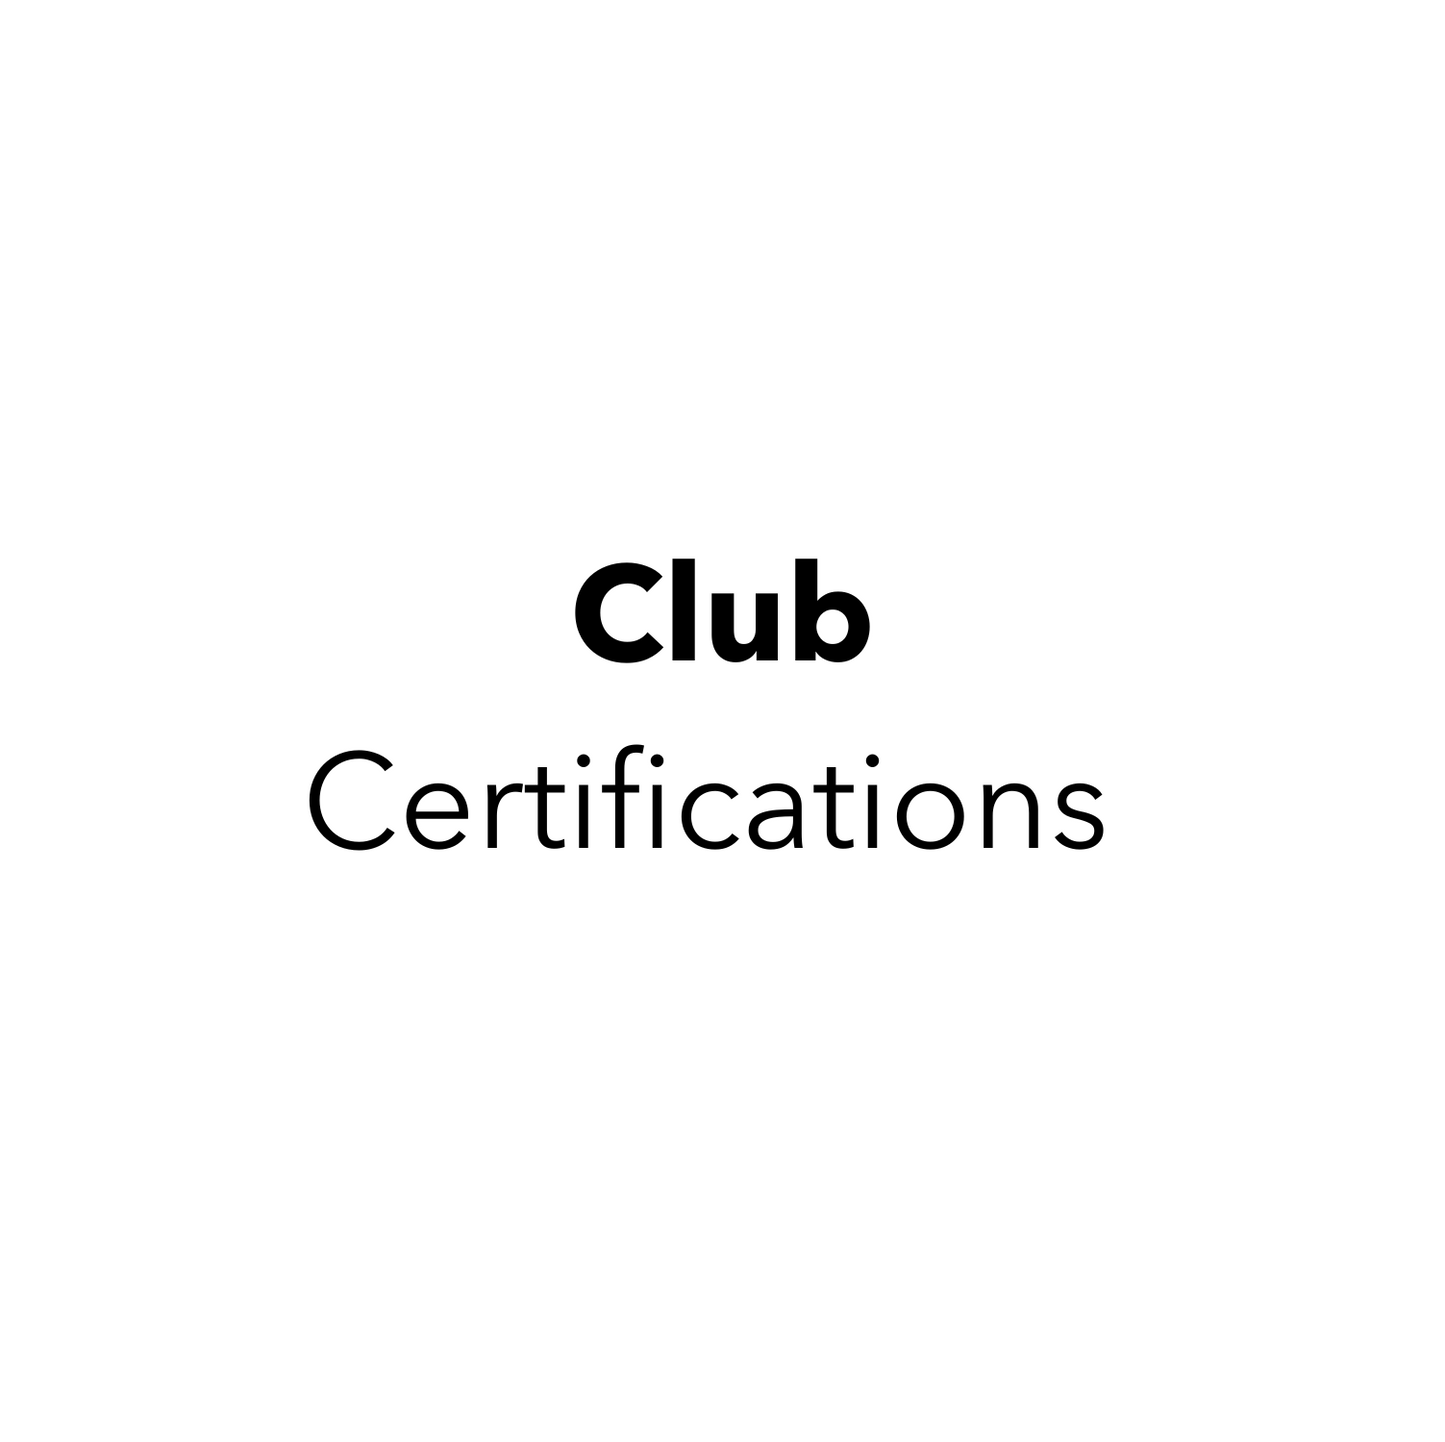 Club Certifications